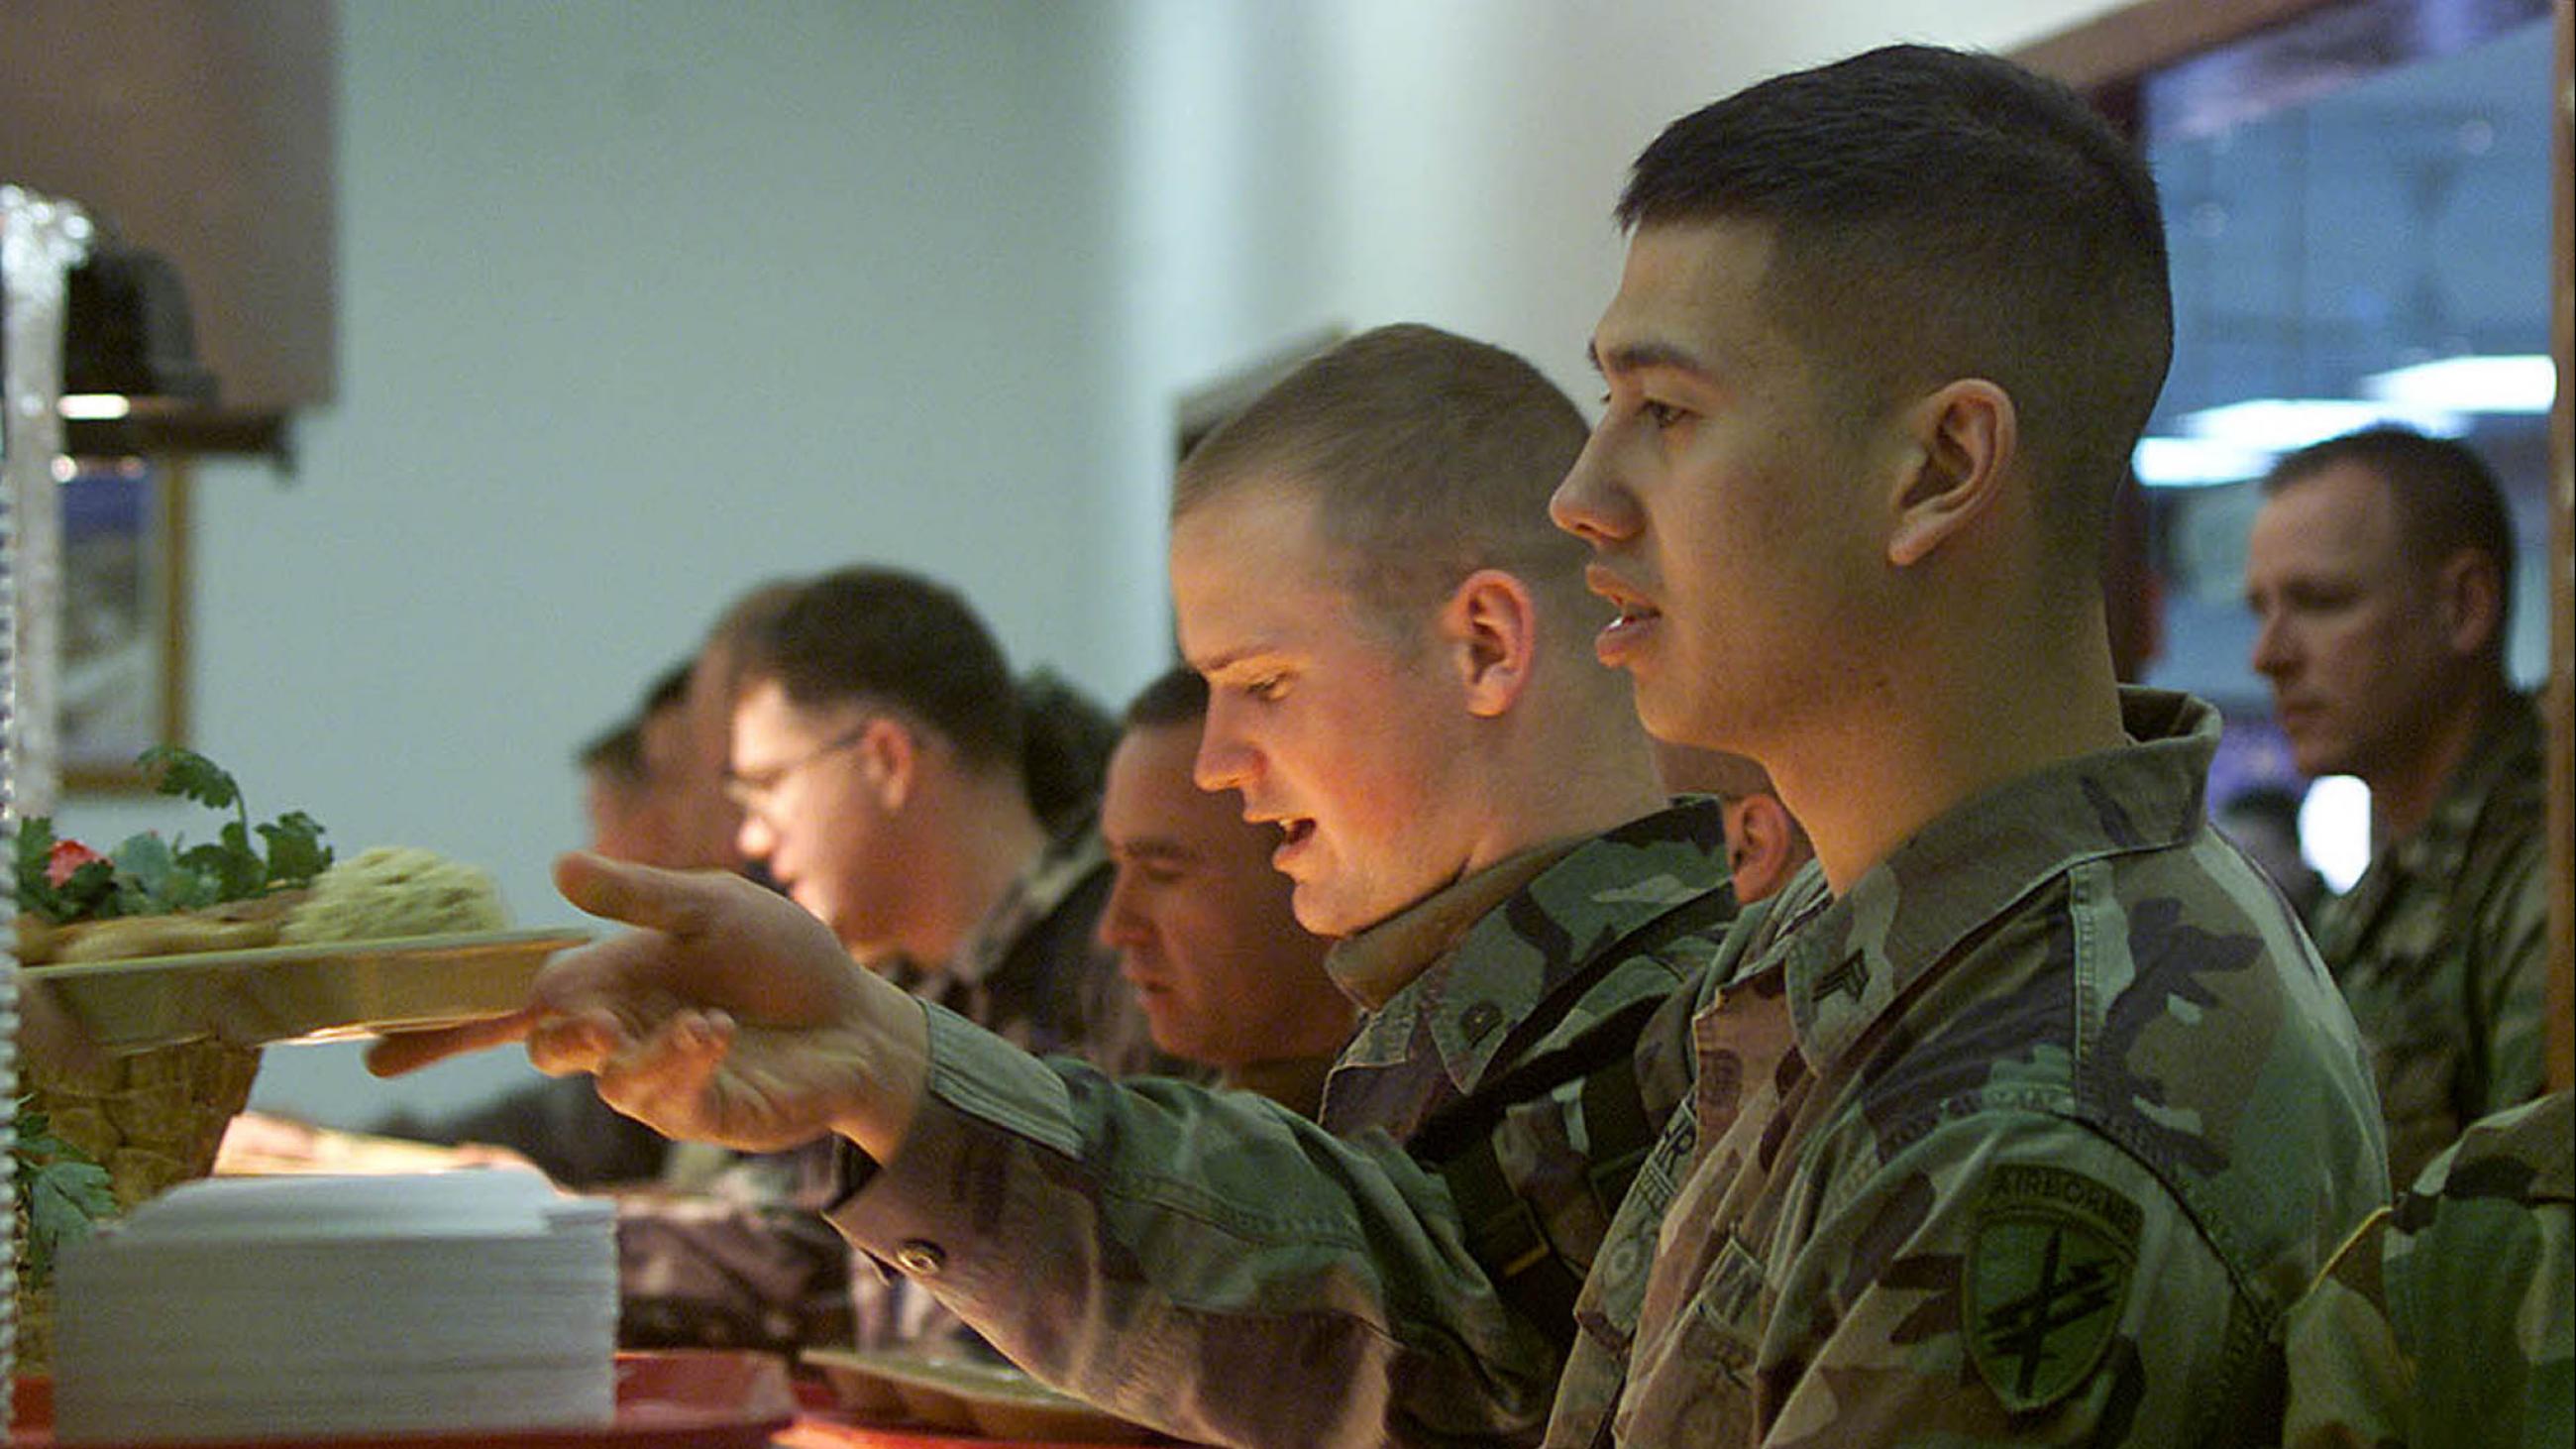 U.S. peacekeepers at camp Bondsteel in southern Kosovo line up to pick a rich selection of dishes, including roast turkey with giblet gravy, during their celebration of Thanksgivings day on Thursday November 22, 2001.